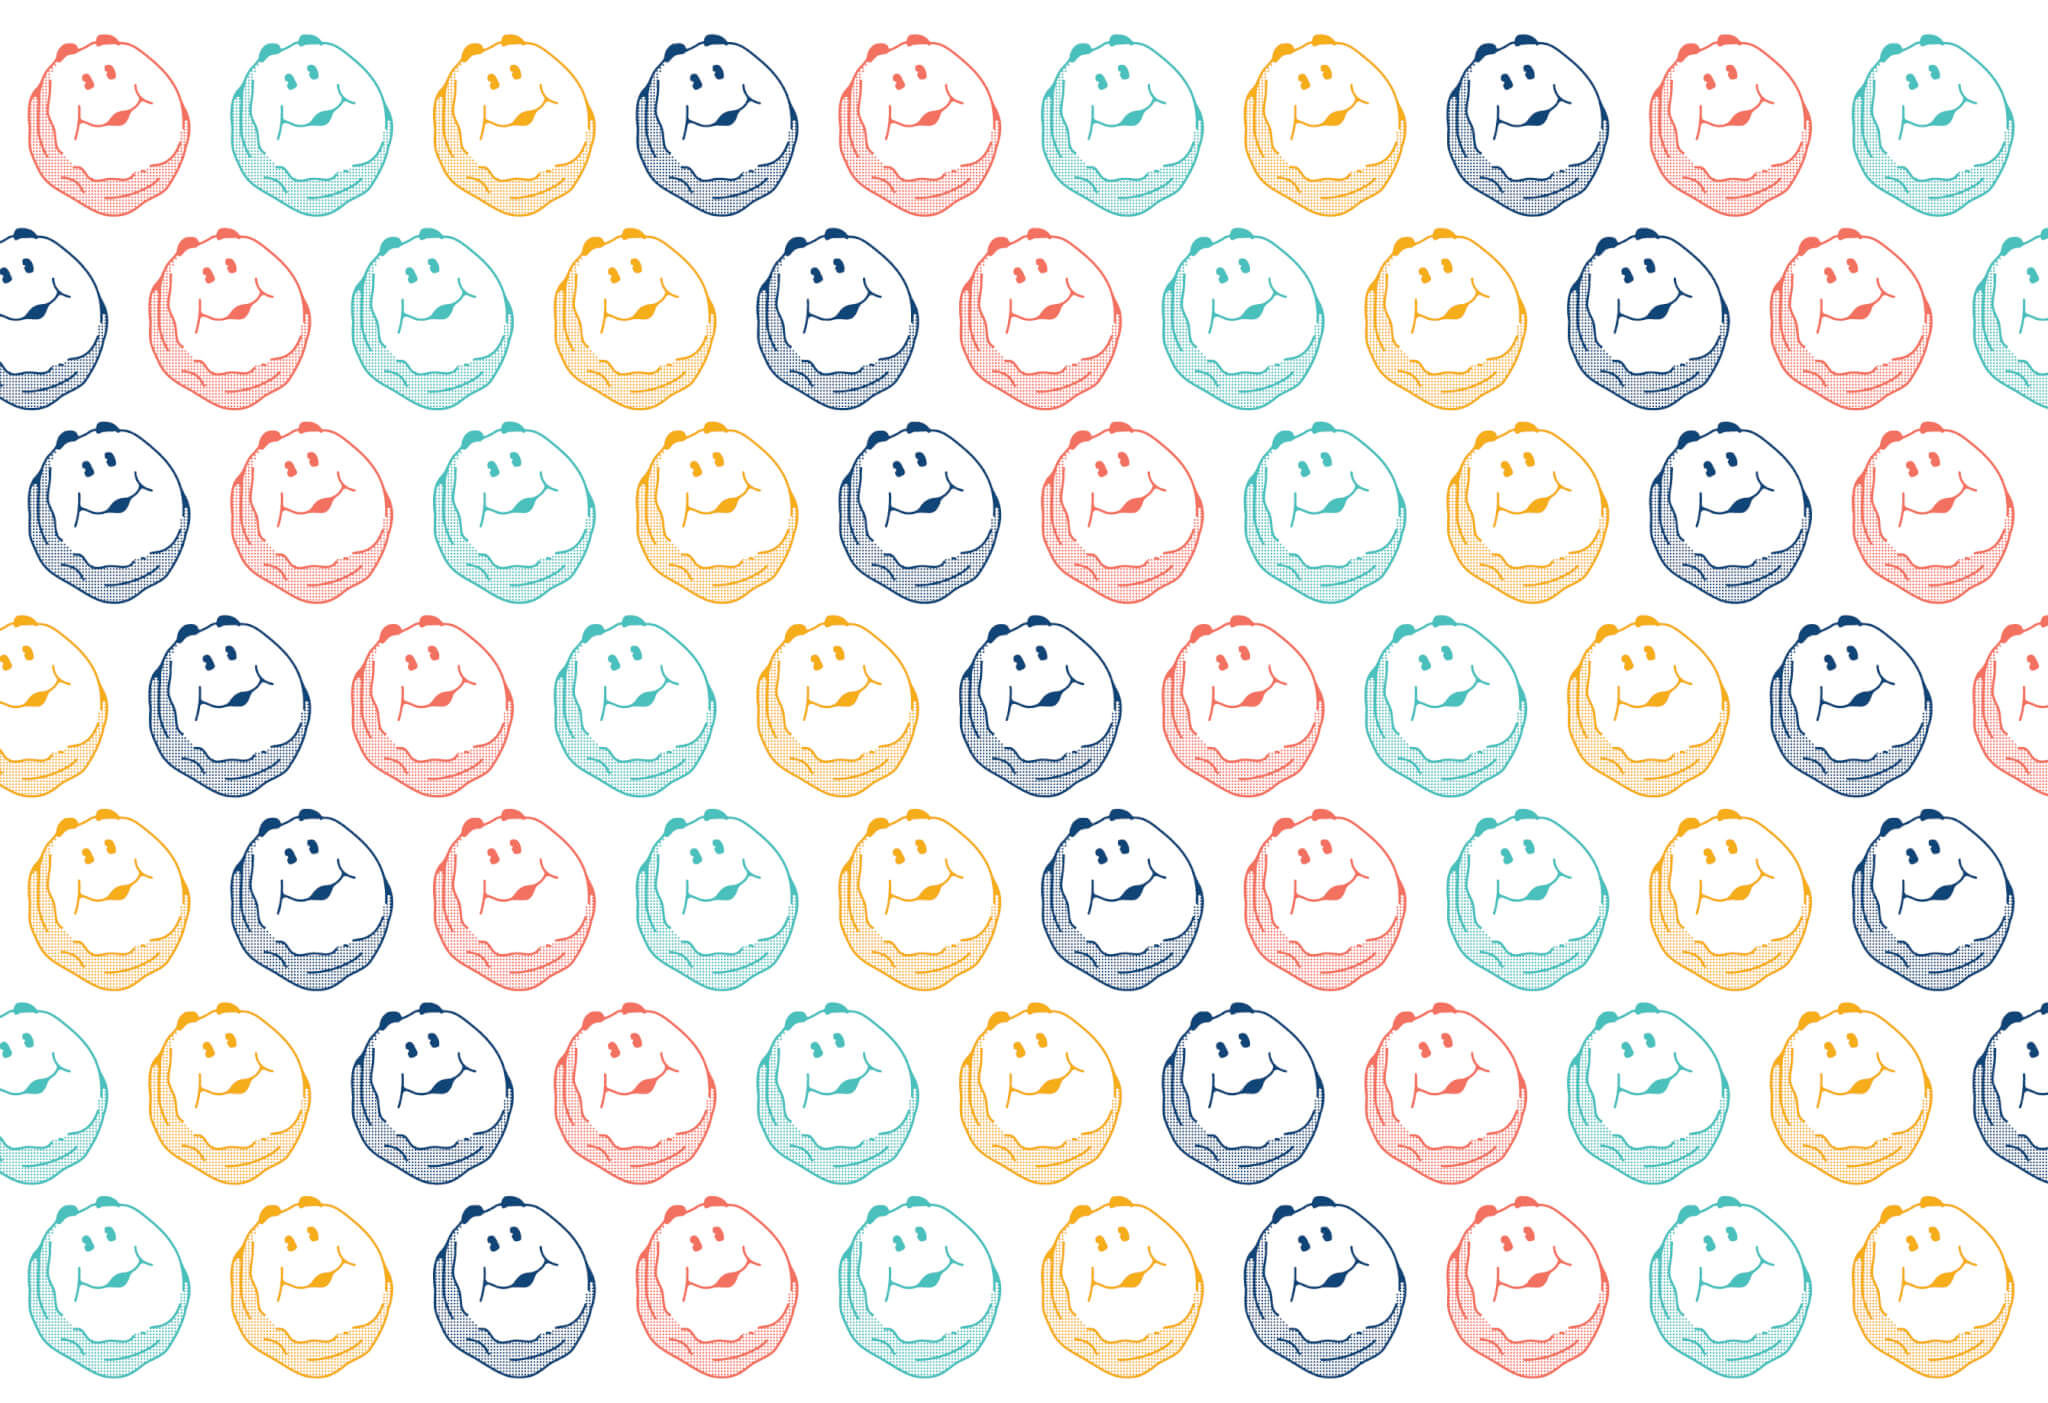 Biscuit Belly multi-color biscuit faces